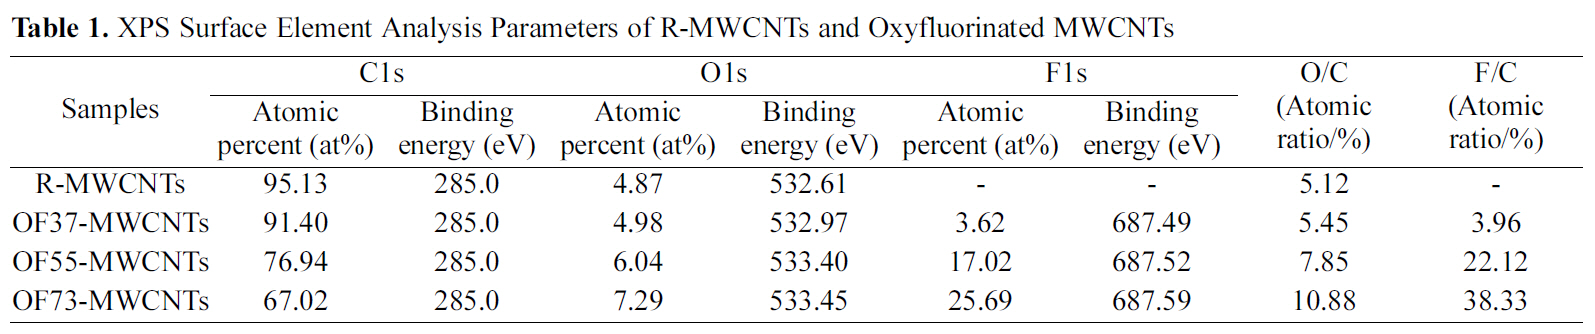 XPS Surface Element Analysis Parameters of R-MWCNTs and Oxyfluorinated MWCNTs